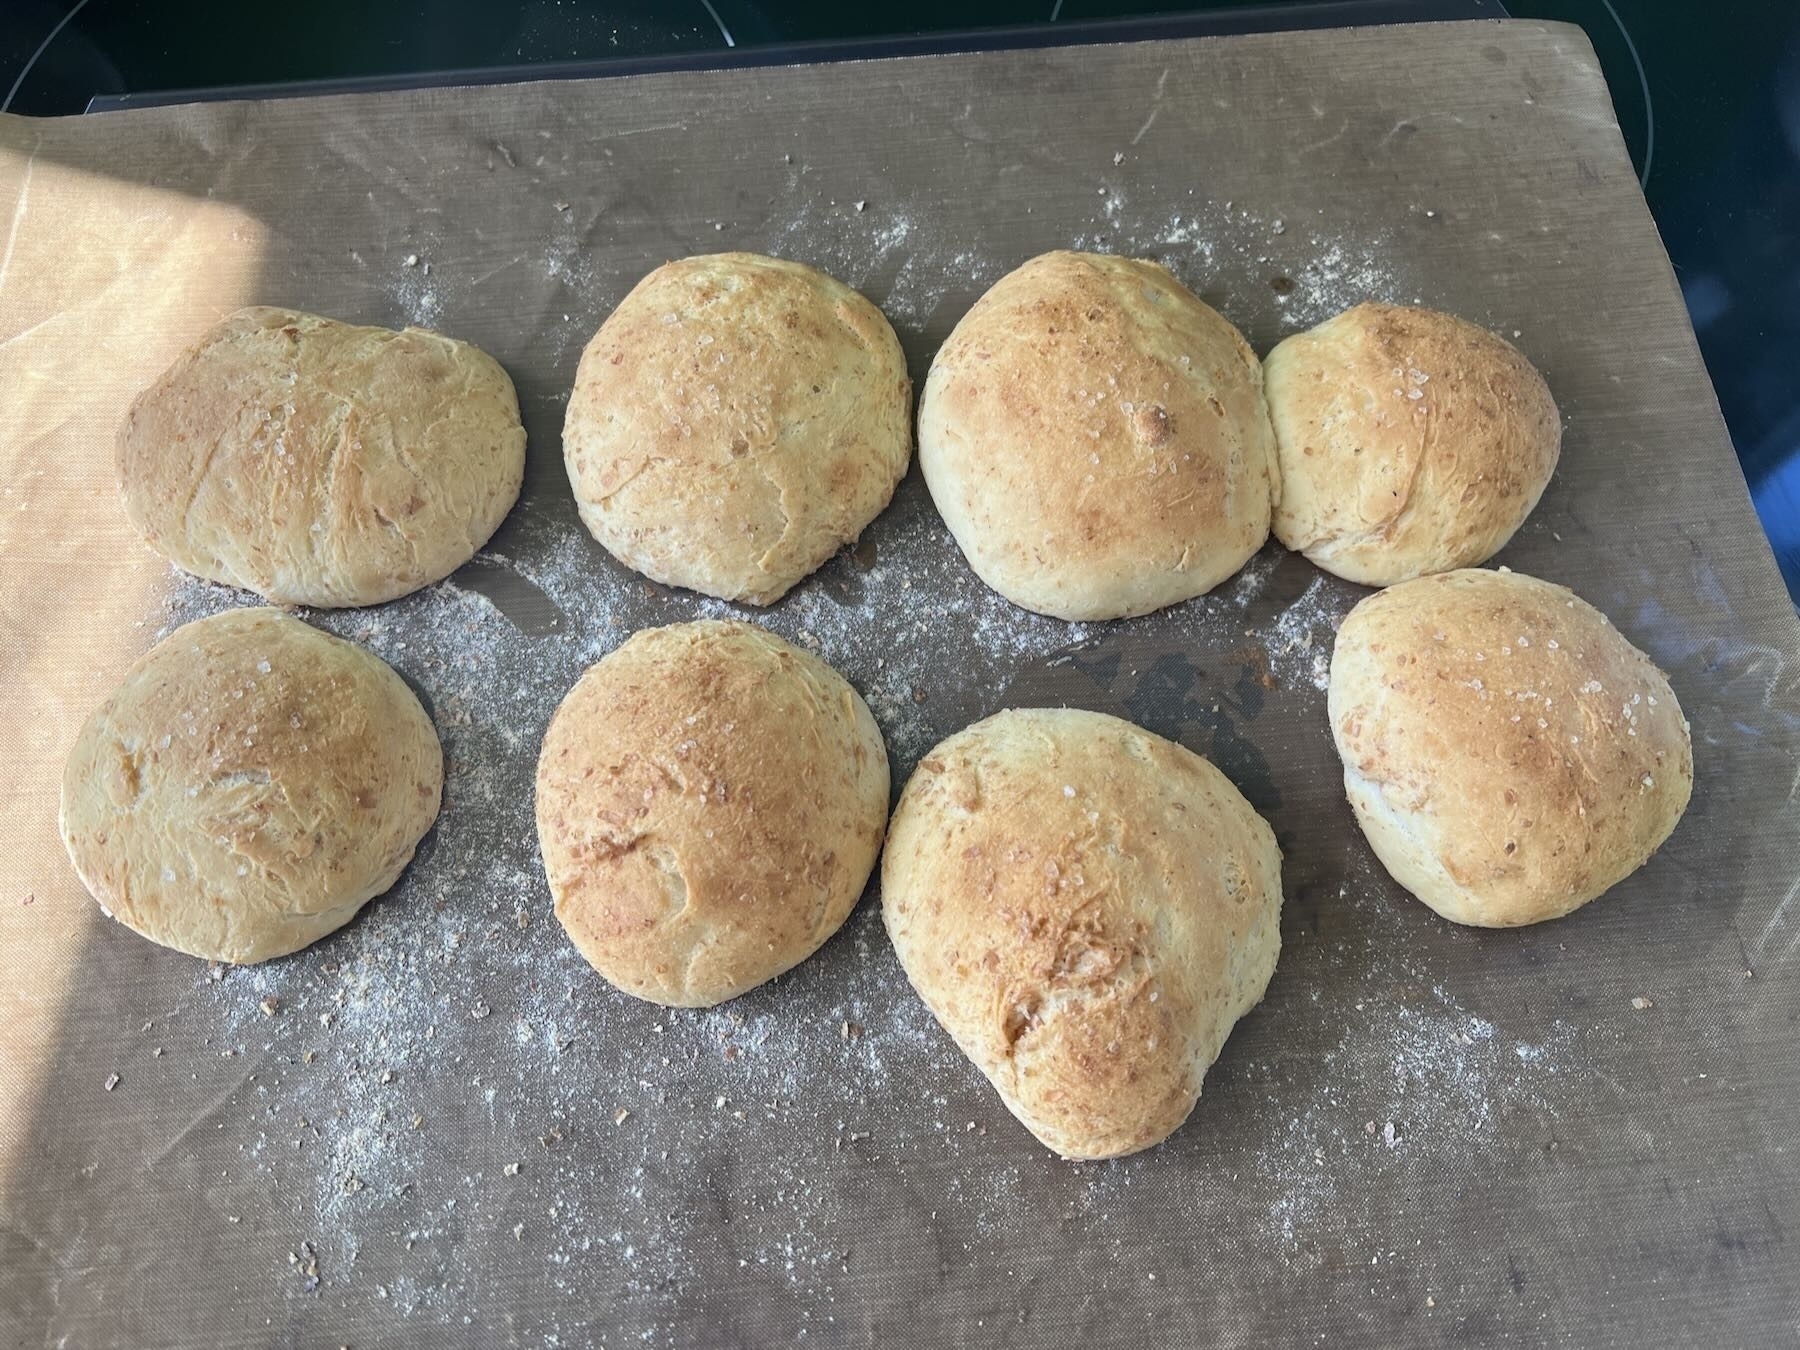 Bread rolls fresh from the oven.